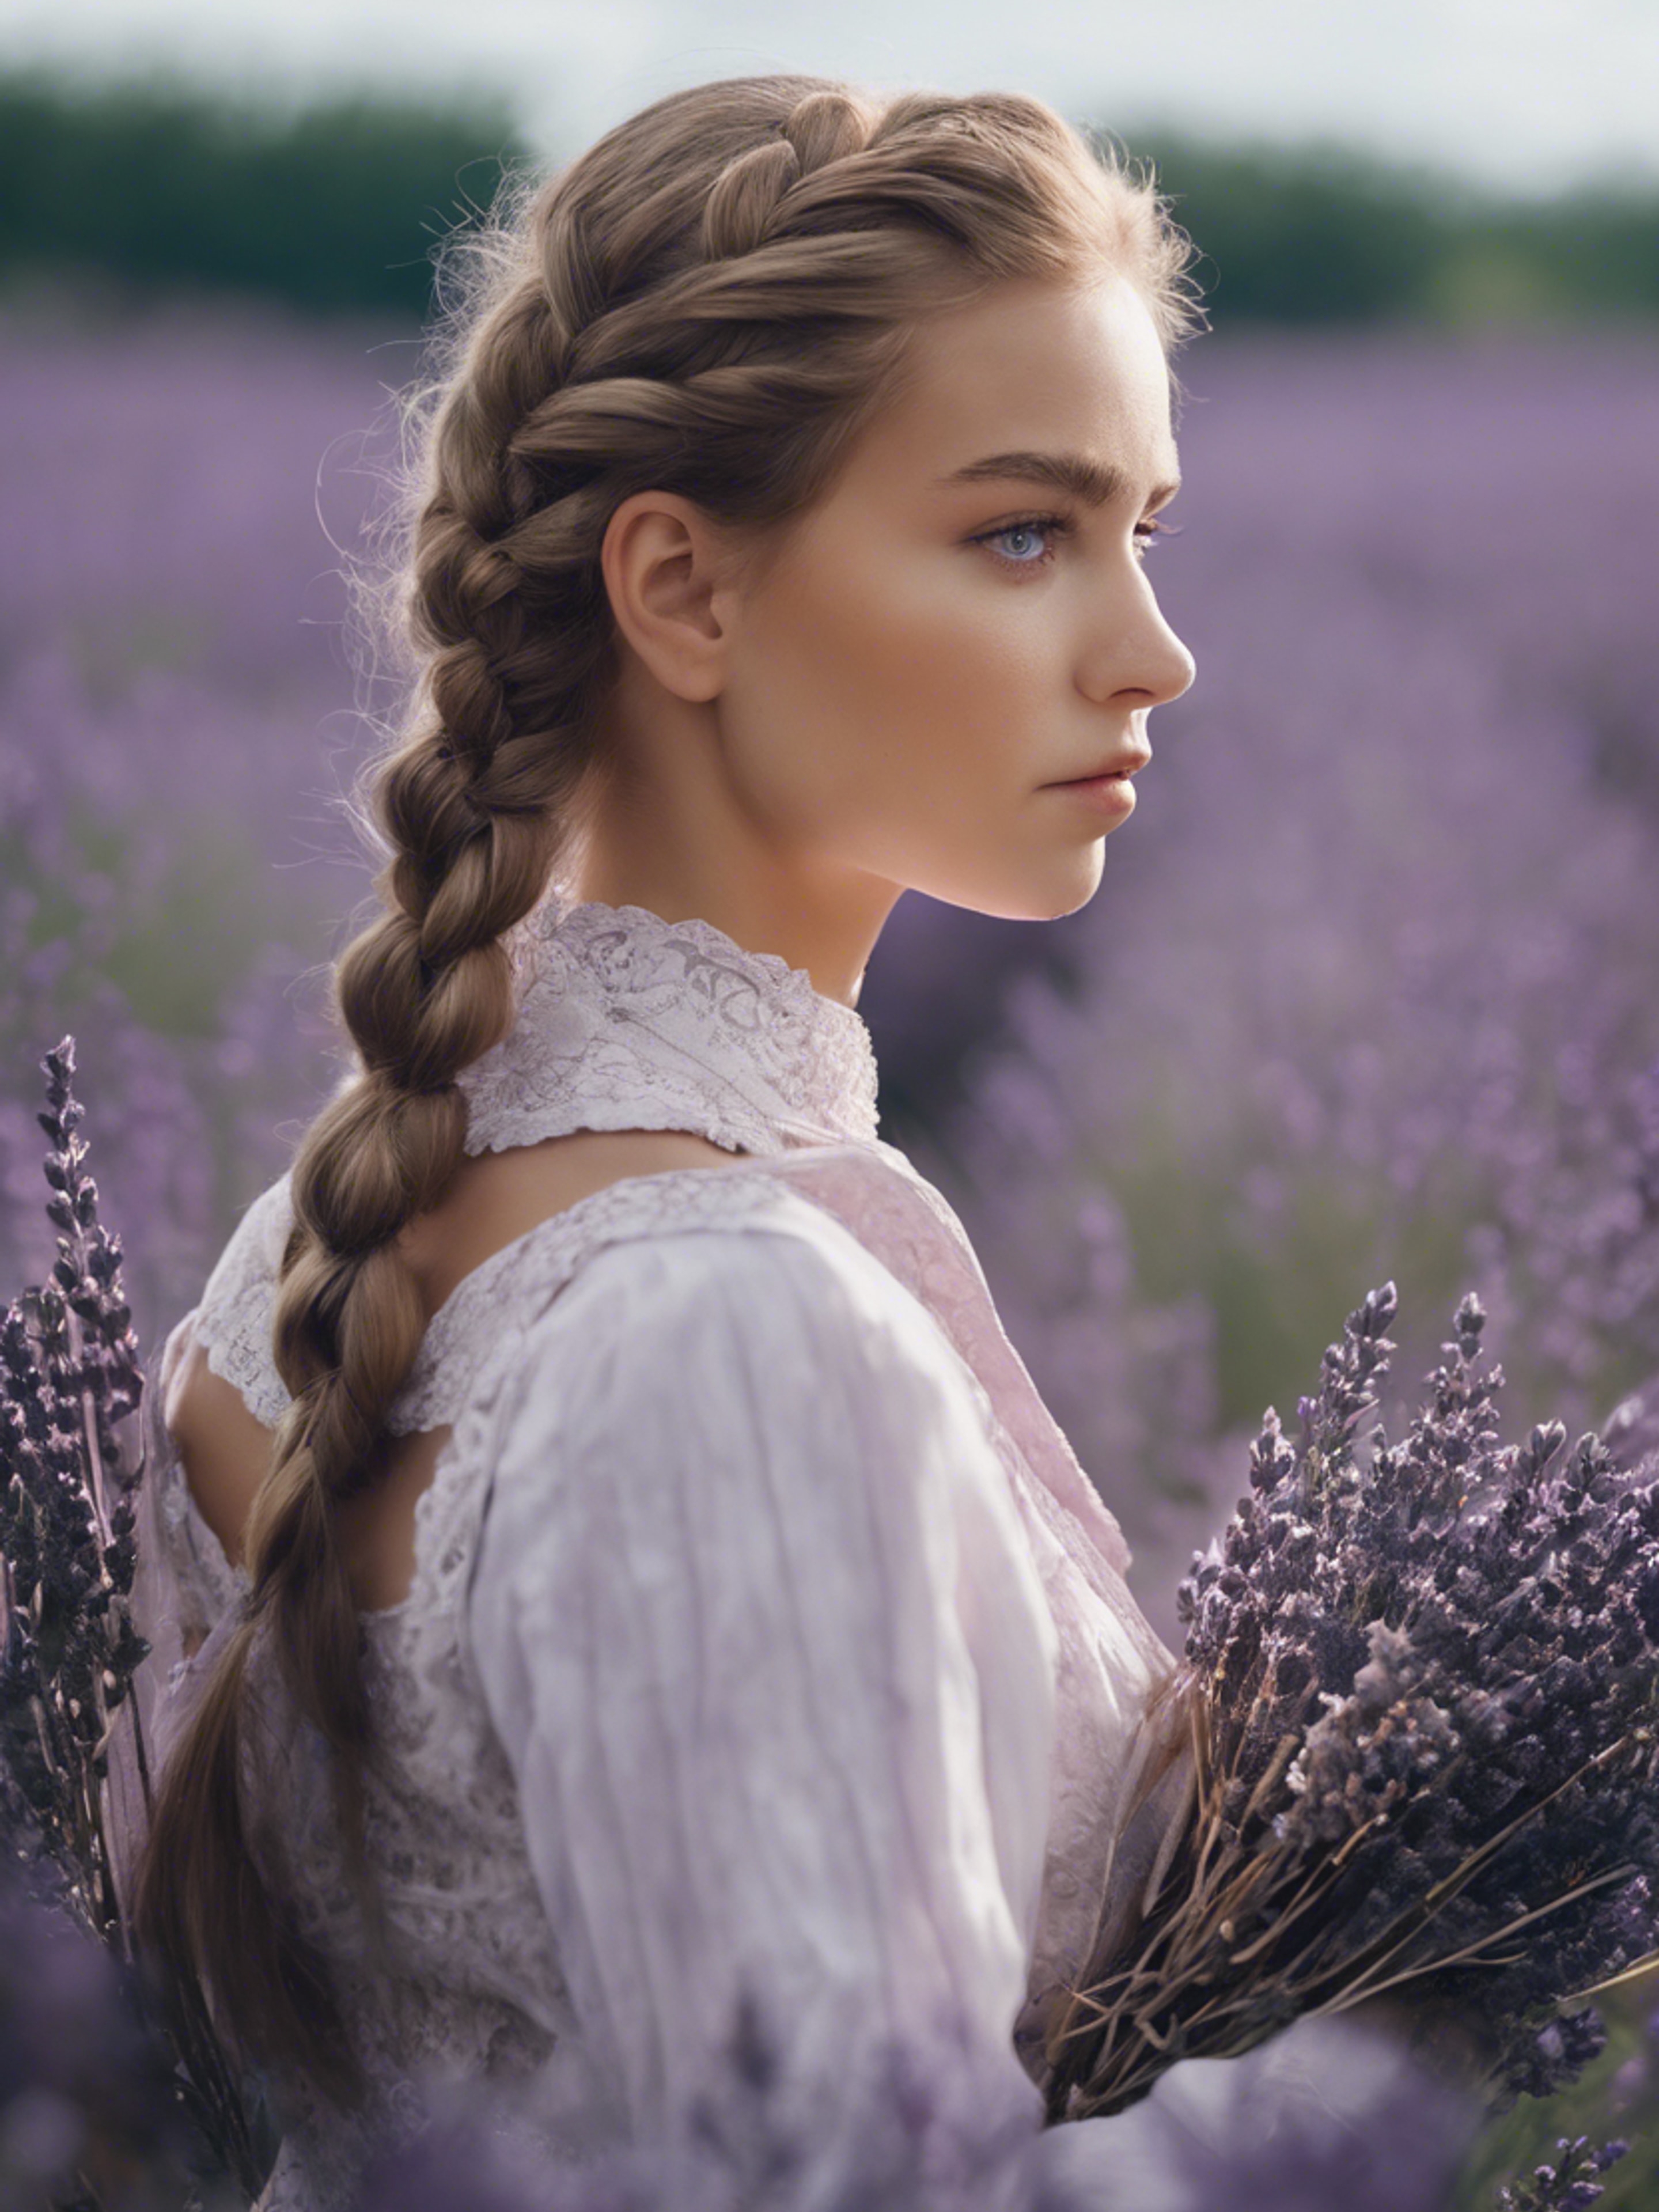 A pretty, light-eyed girl with her hair done in classic French braid, surrounded by a field of French lavender. Tapet[c71d23e36c7041a09435]